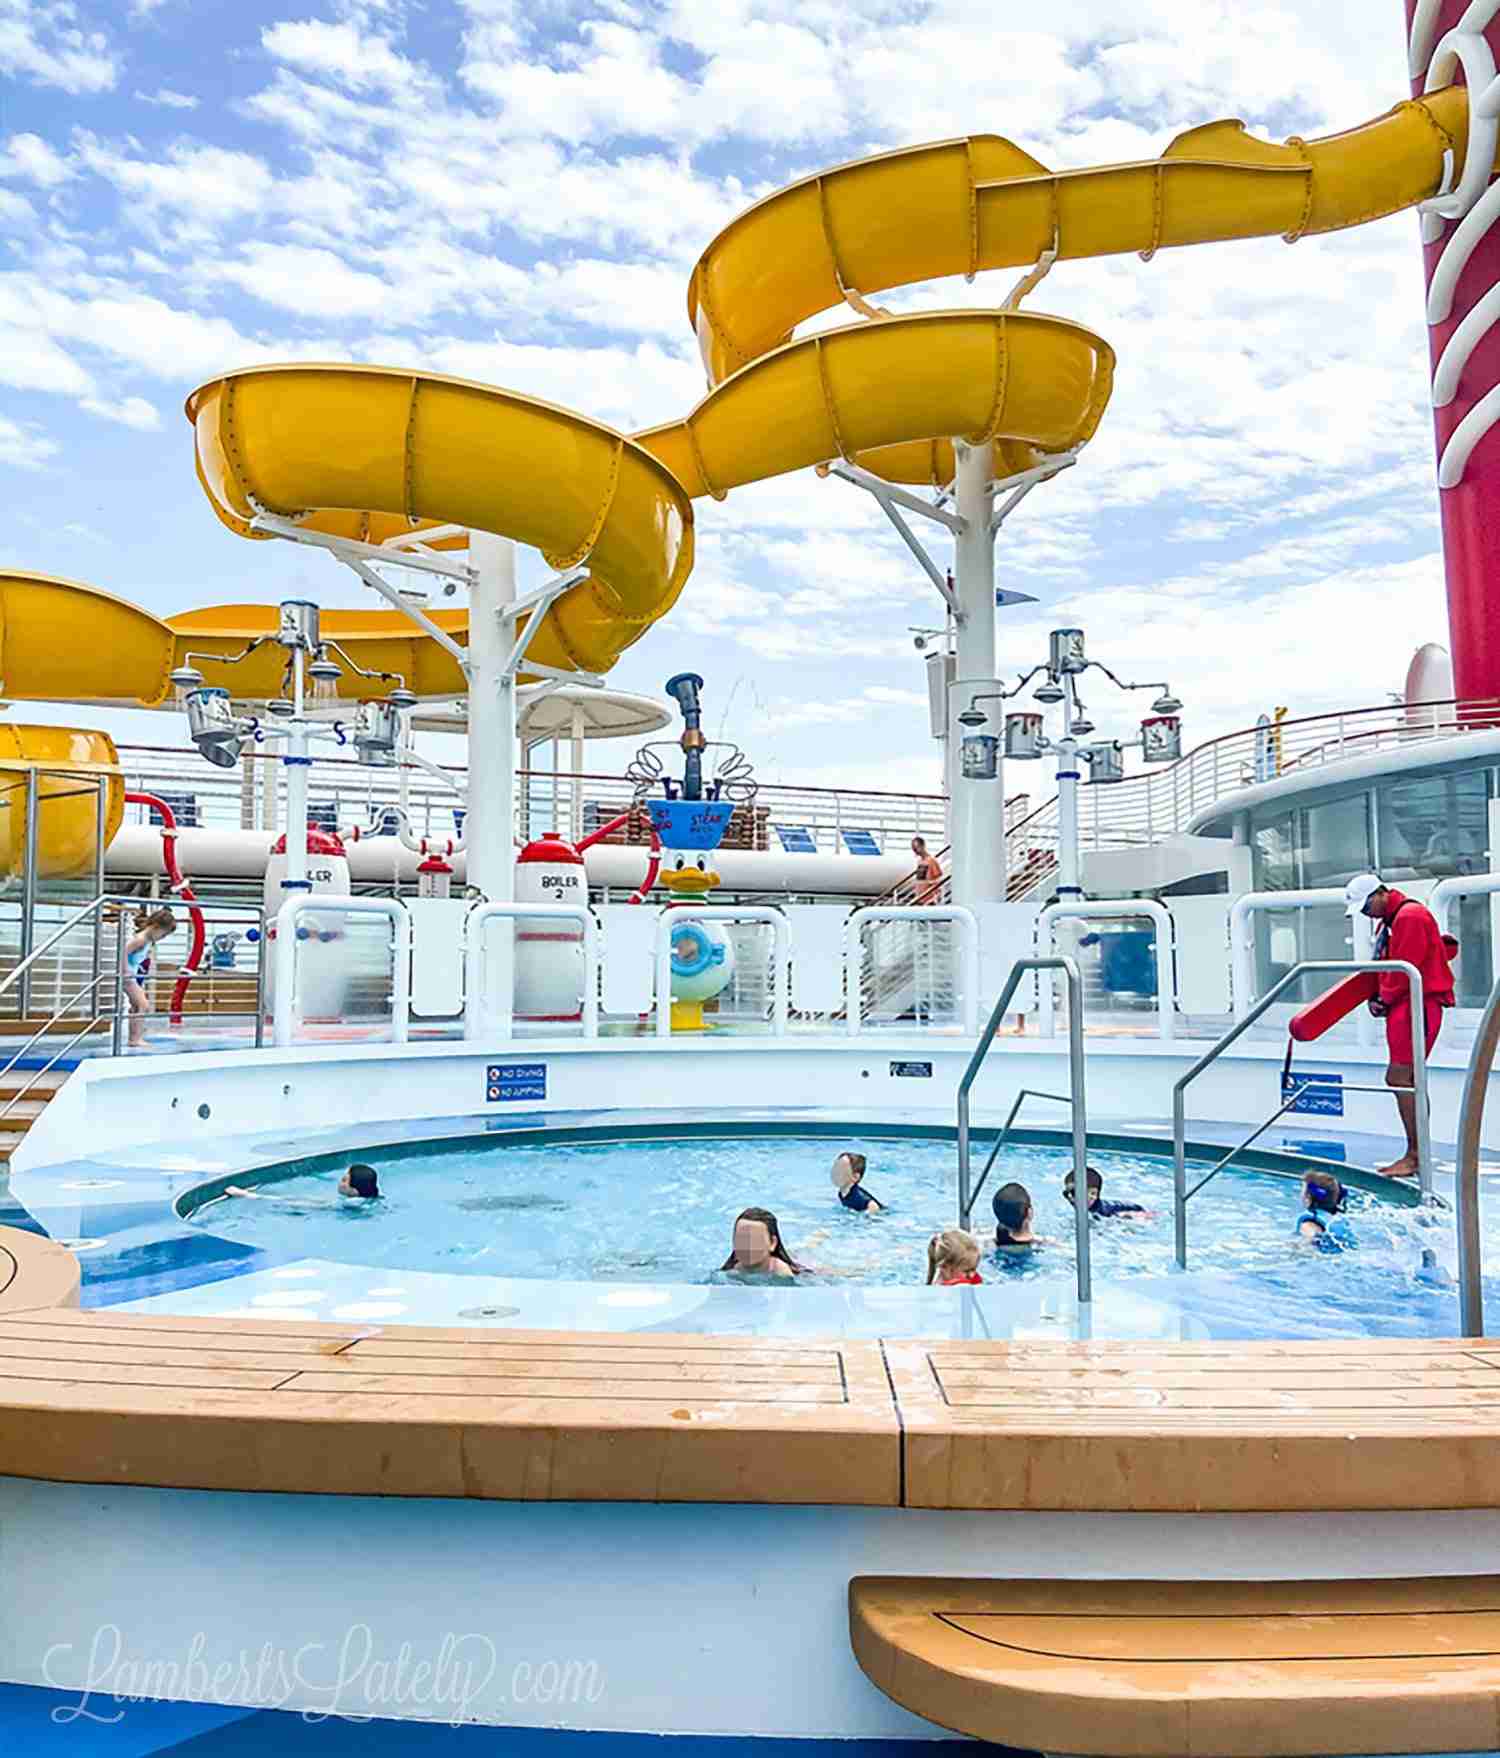 This list of Disney Cruise hacks has tips and tricks for saving money, how to have fun with kids, great (hidden) foods to try, and how to navigate a Disney cruise for a first time traveler.